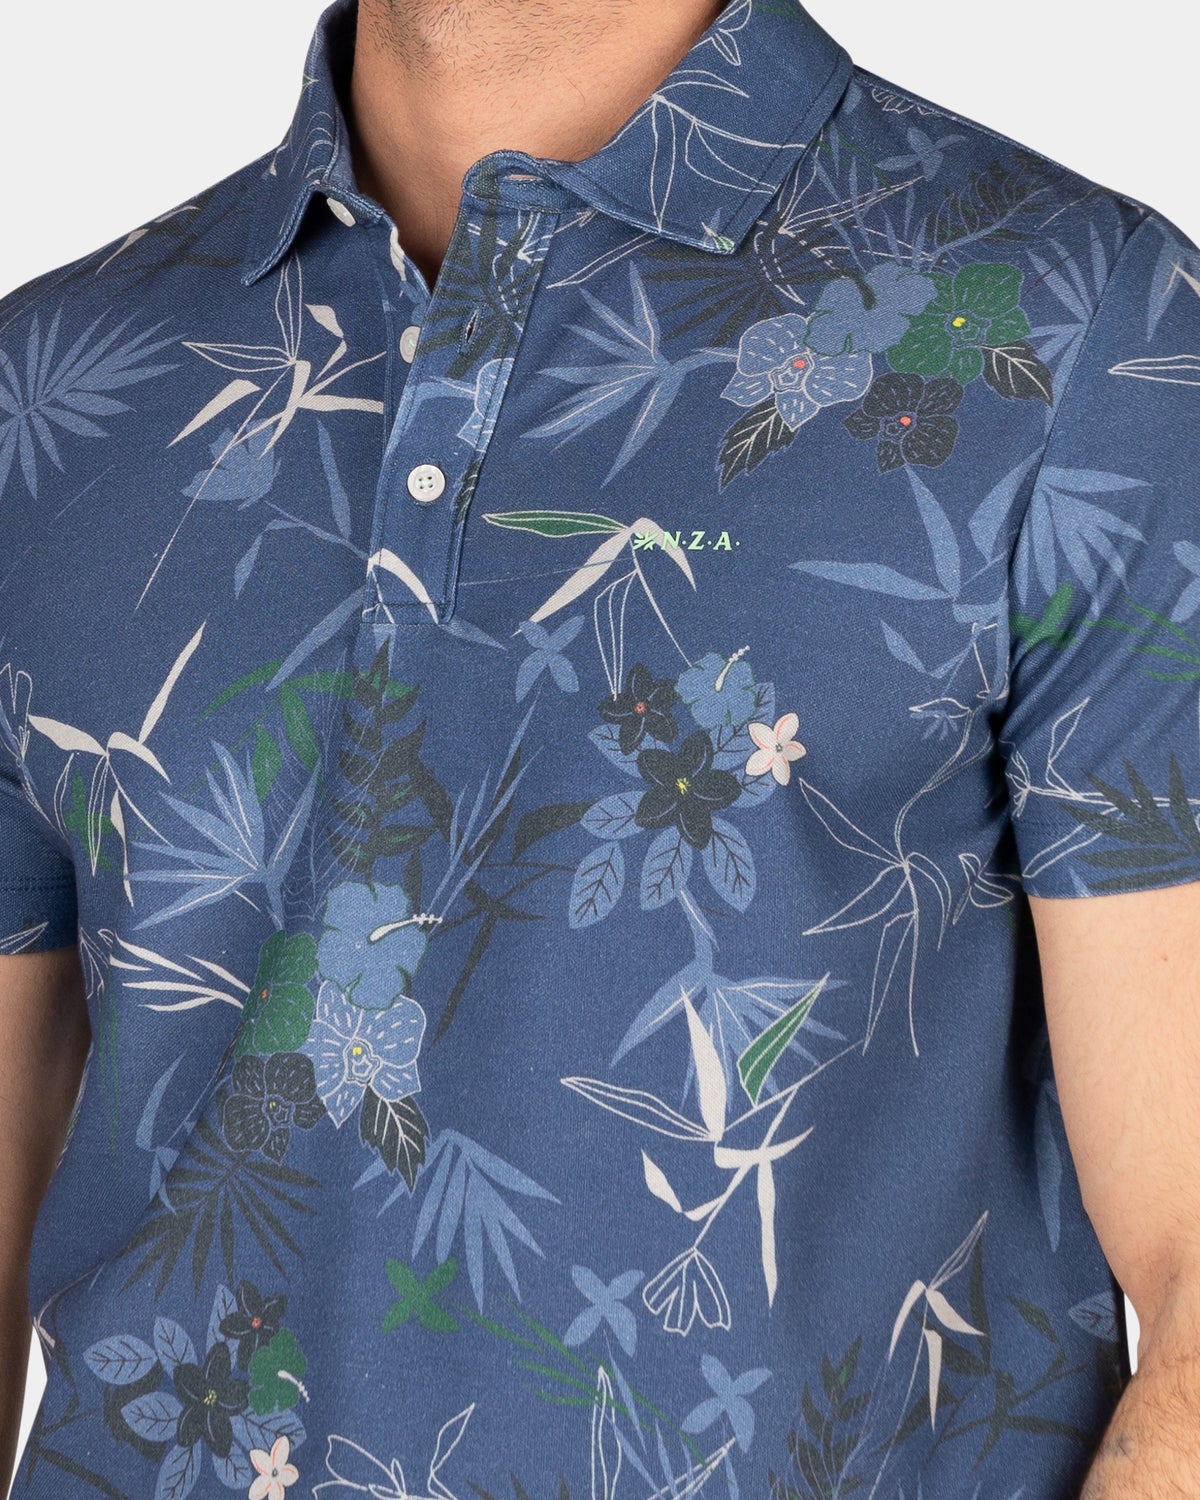 Navy polo with floral print - Dusk Navy